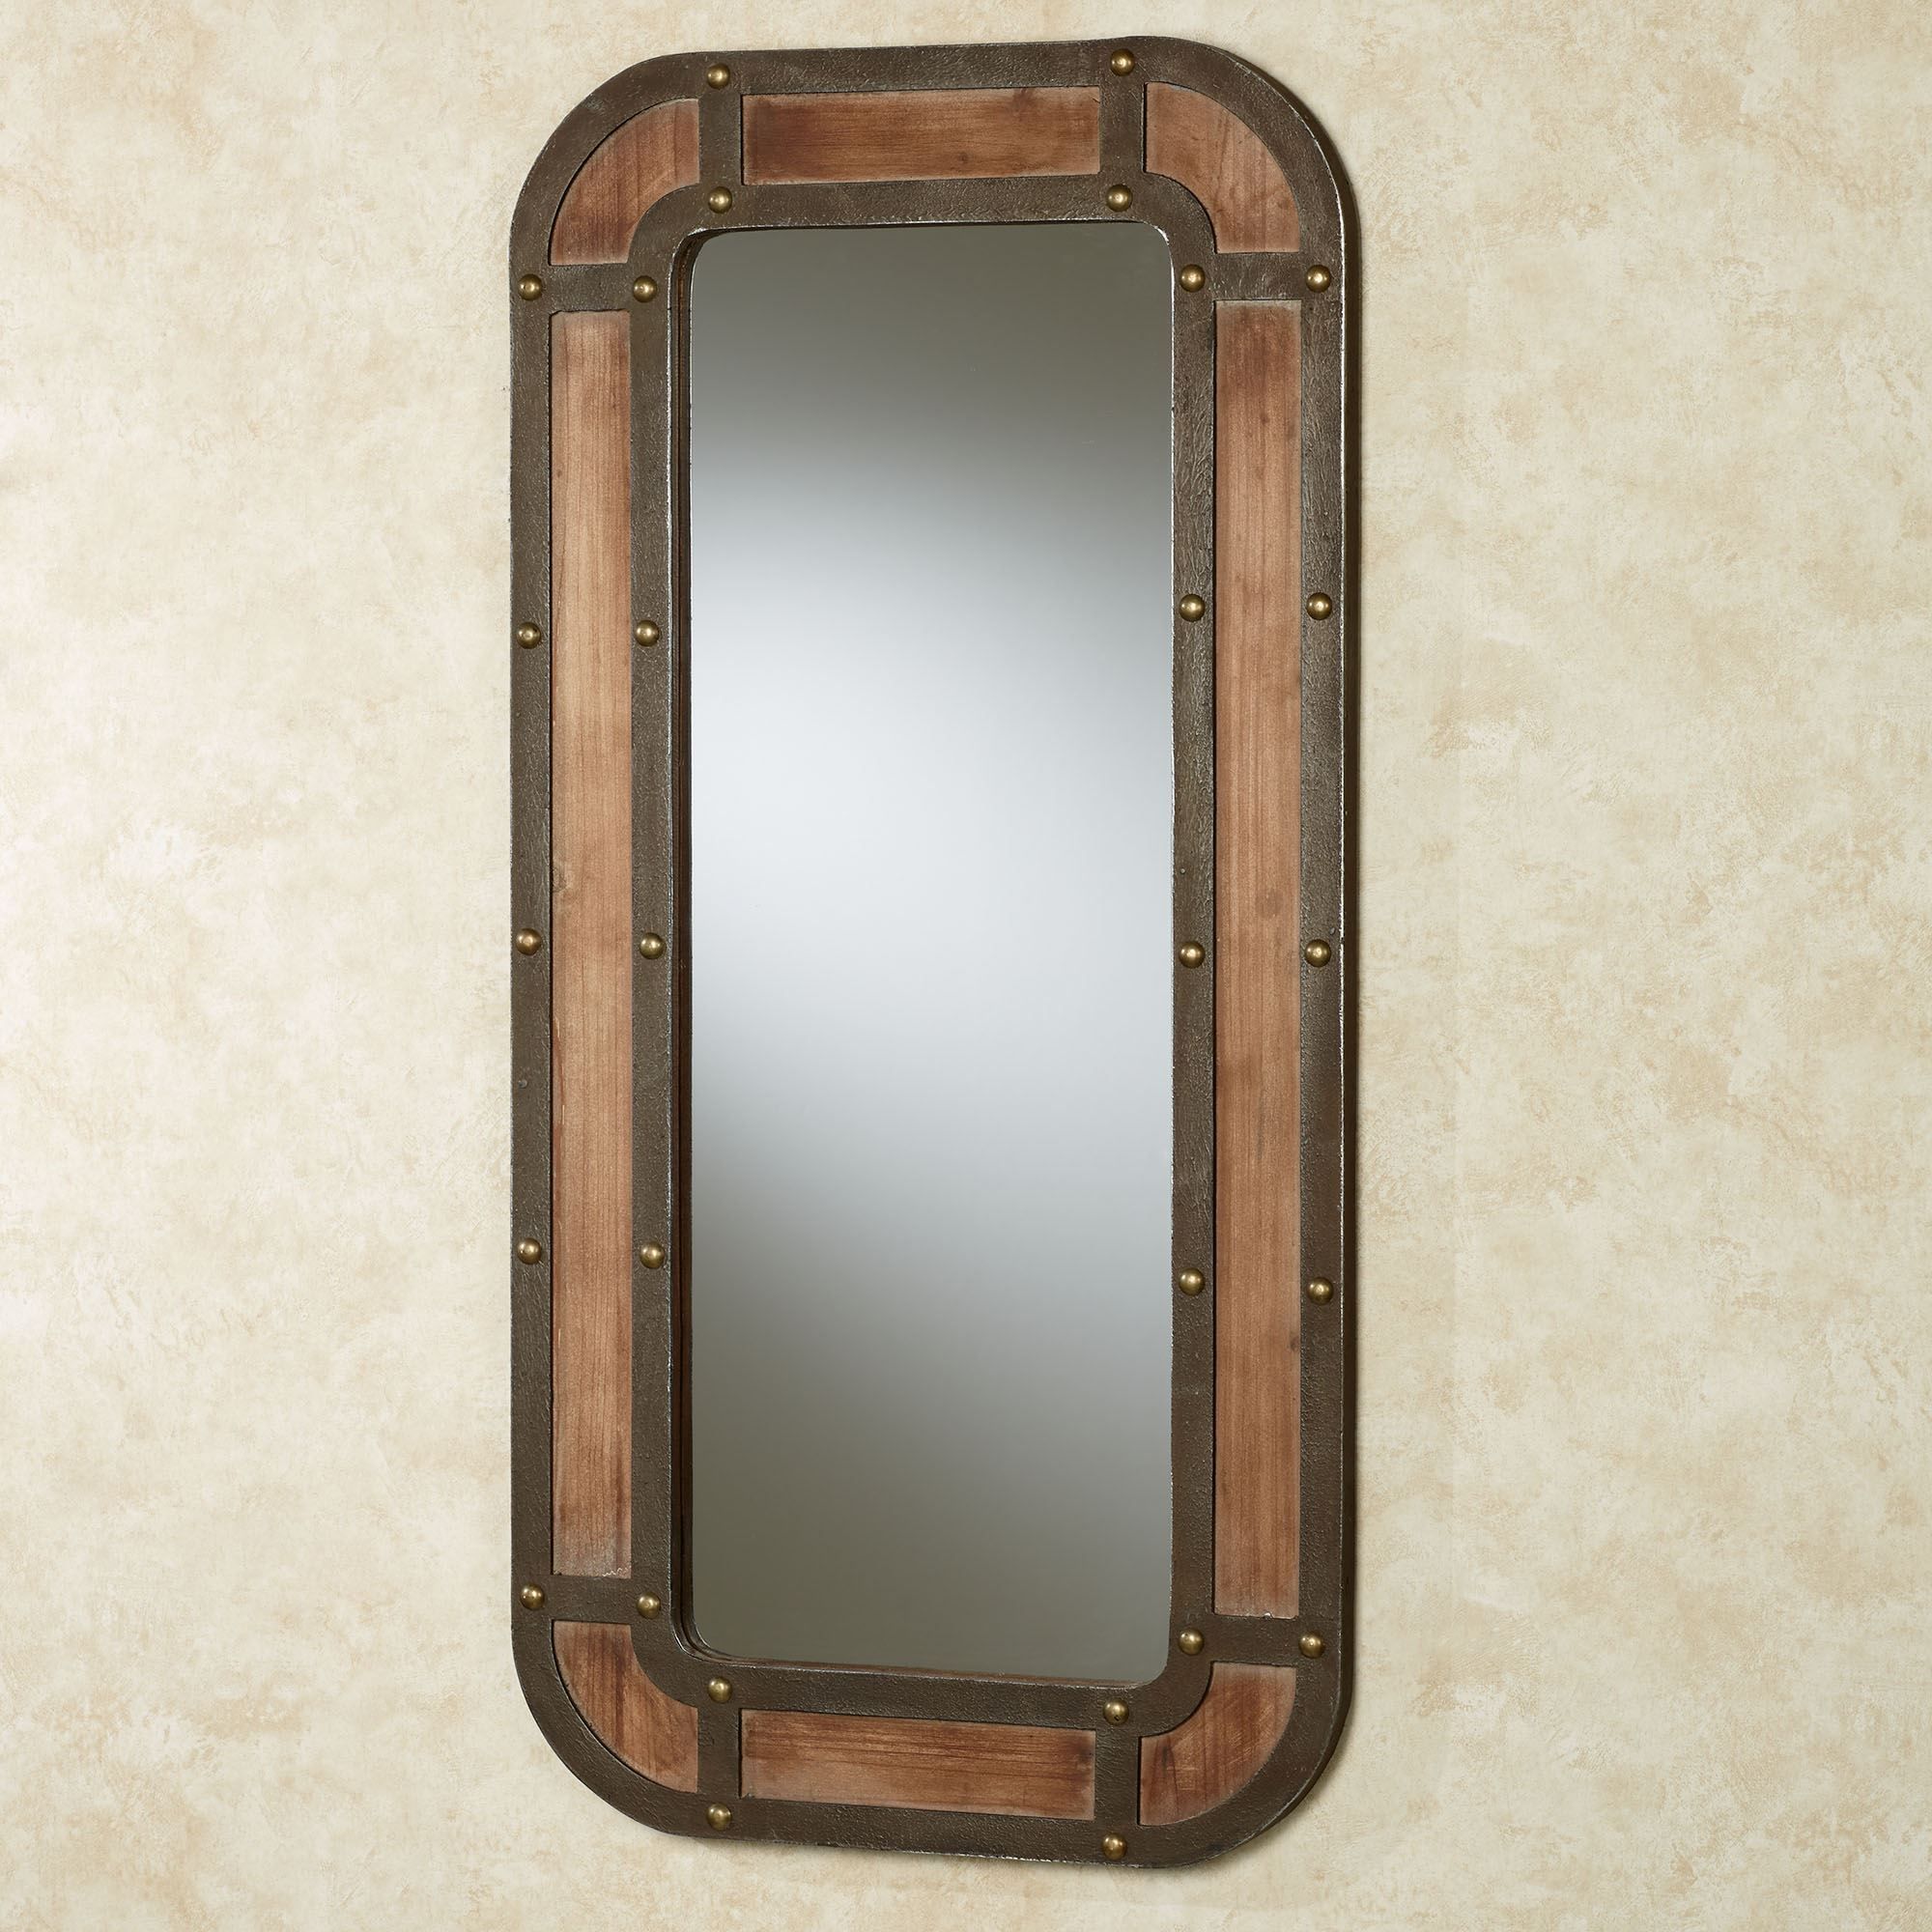 Pikeville Rustic Wooden Rectangular Wall Mirror Intended For Rectangular Grid Wall Mirrors (View 15 of 15)